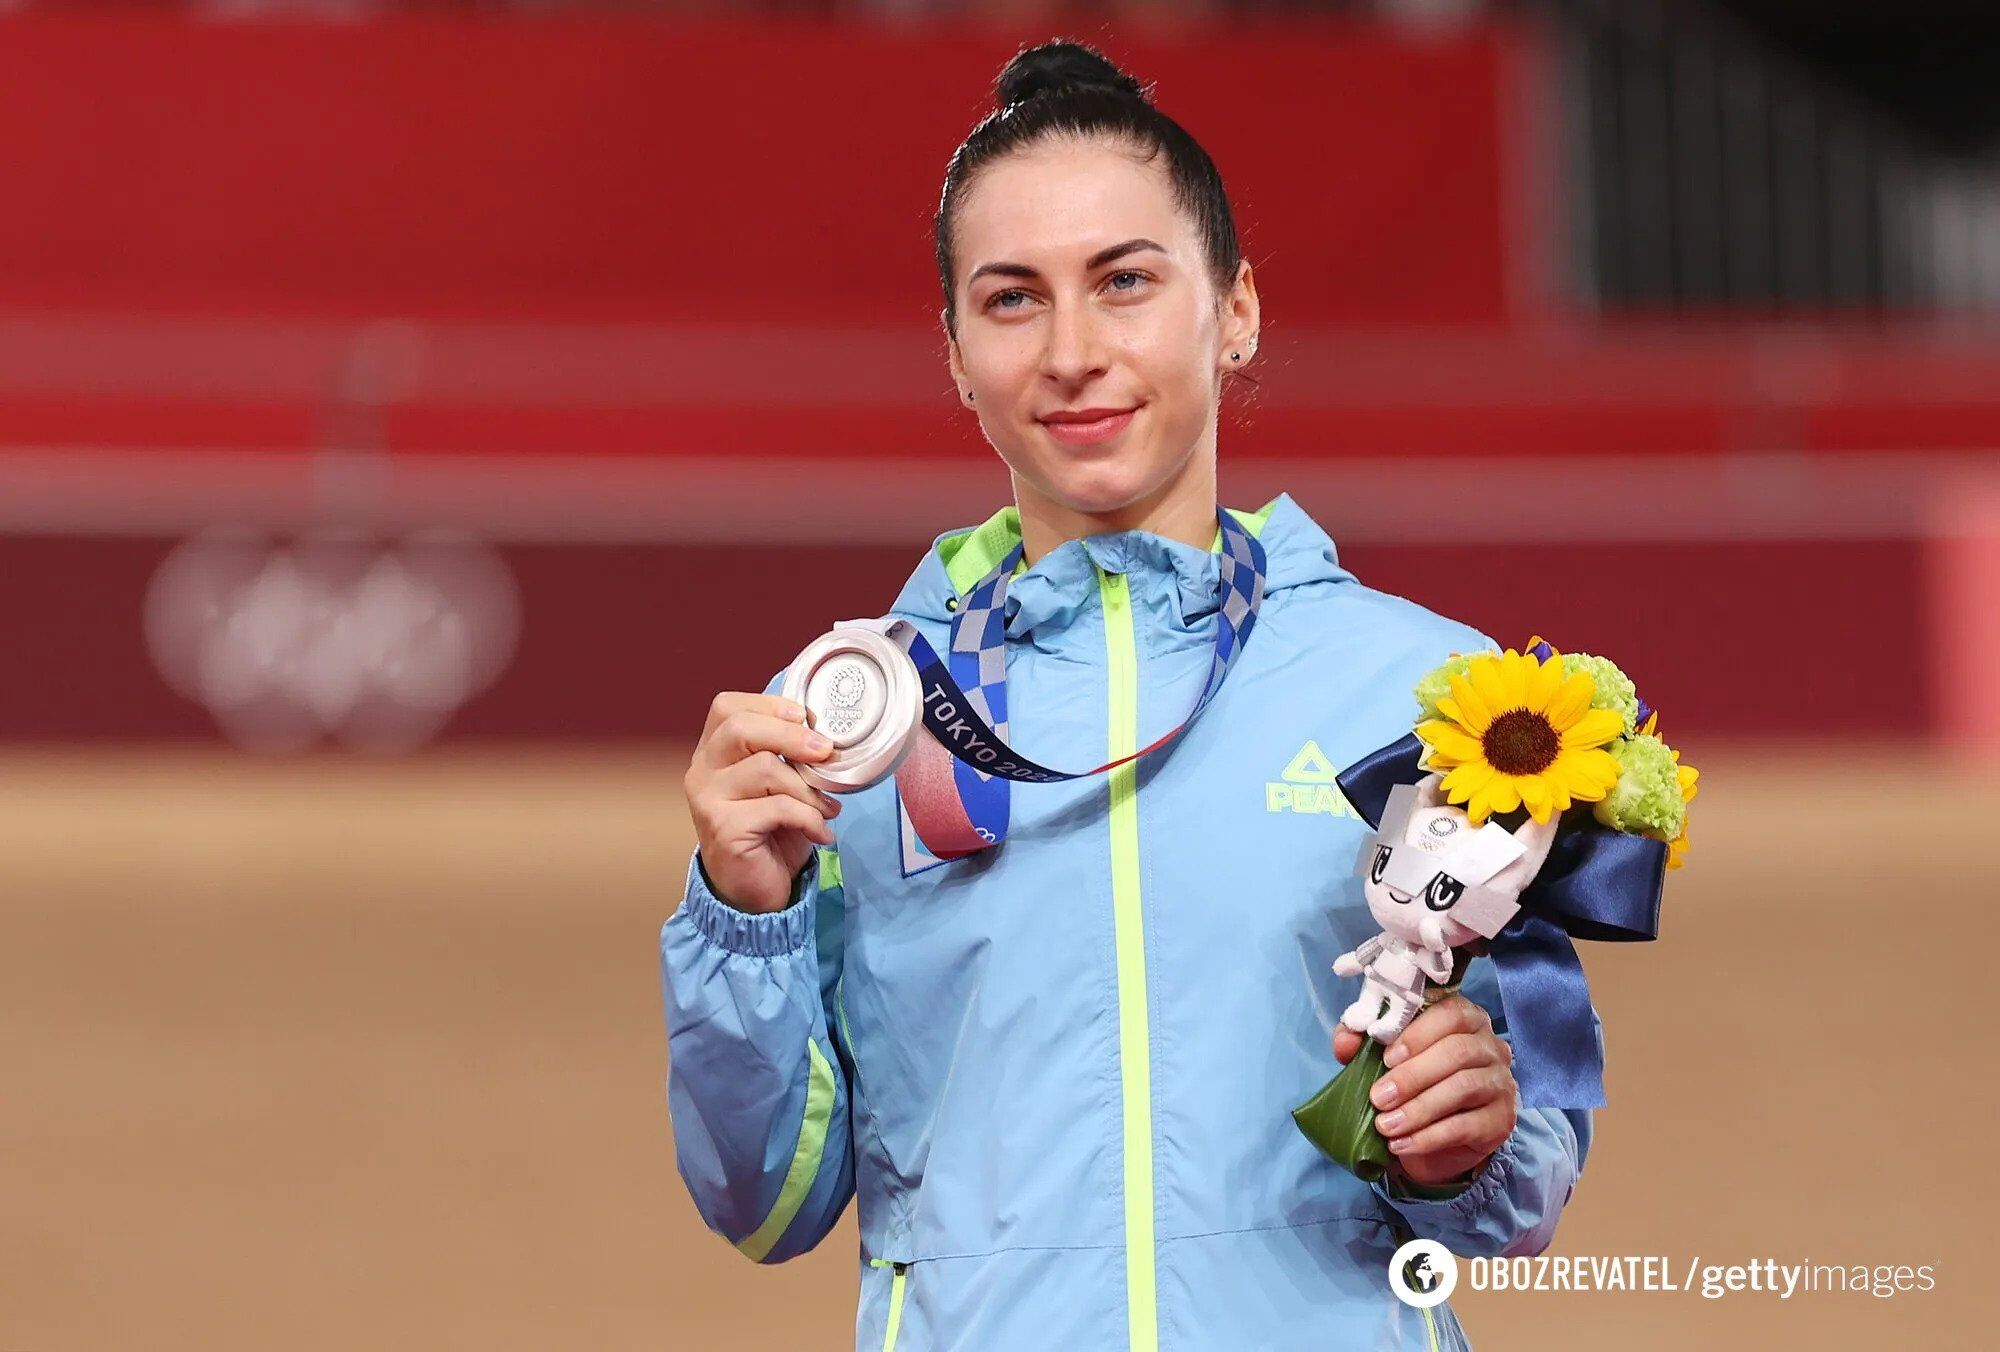 Ukrainian sensation of the 2020 Olympics ended her career at the age of 27